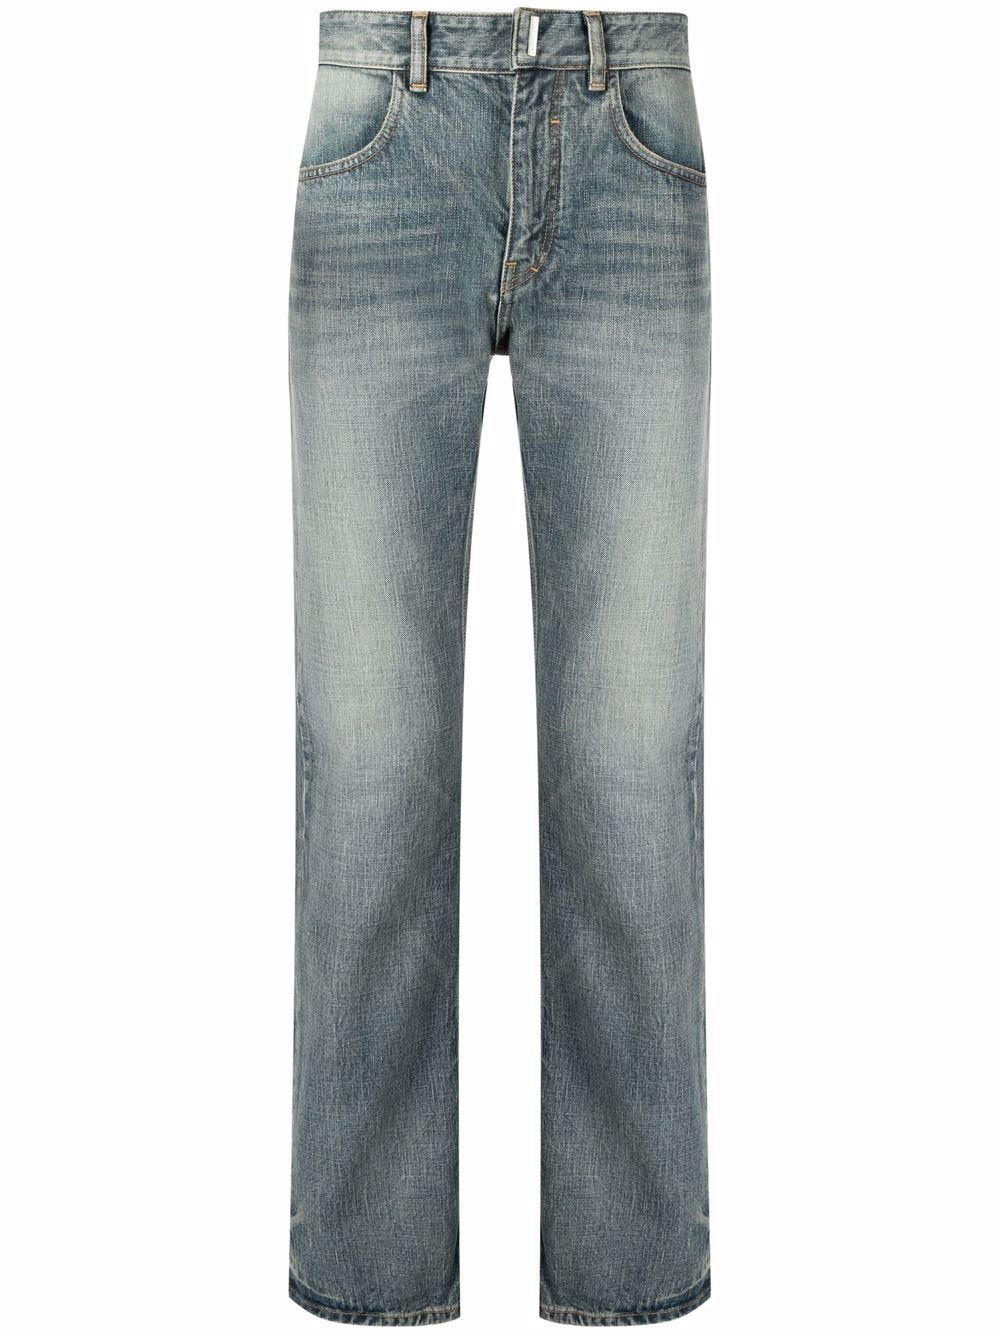 GivenchyVintage Straight-Leg Jeans at Fashion Clinic